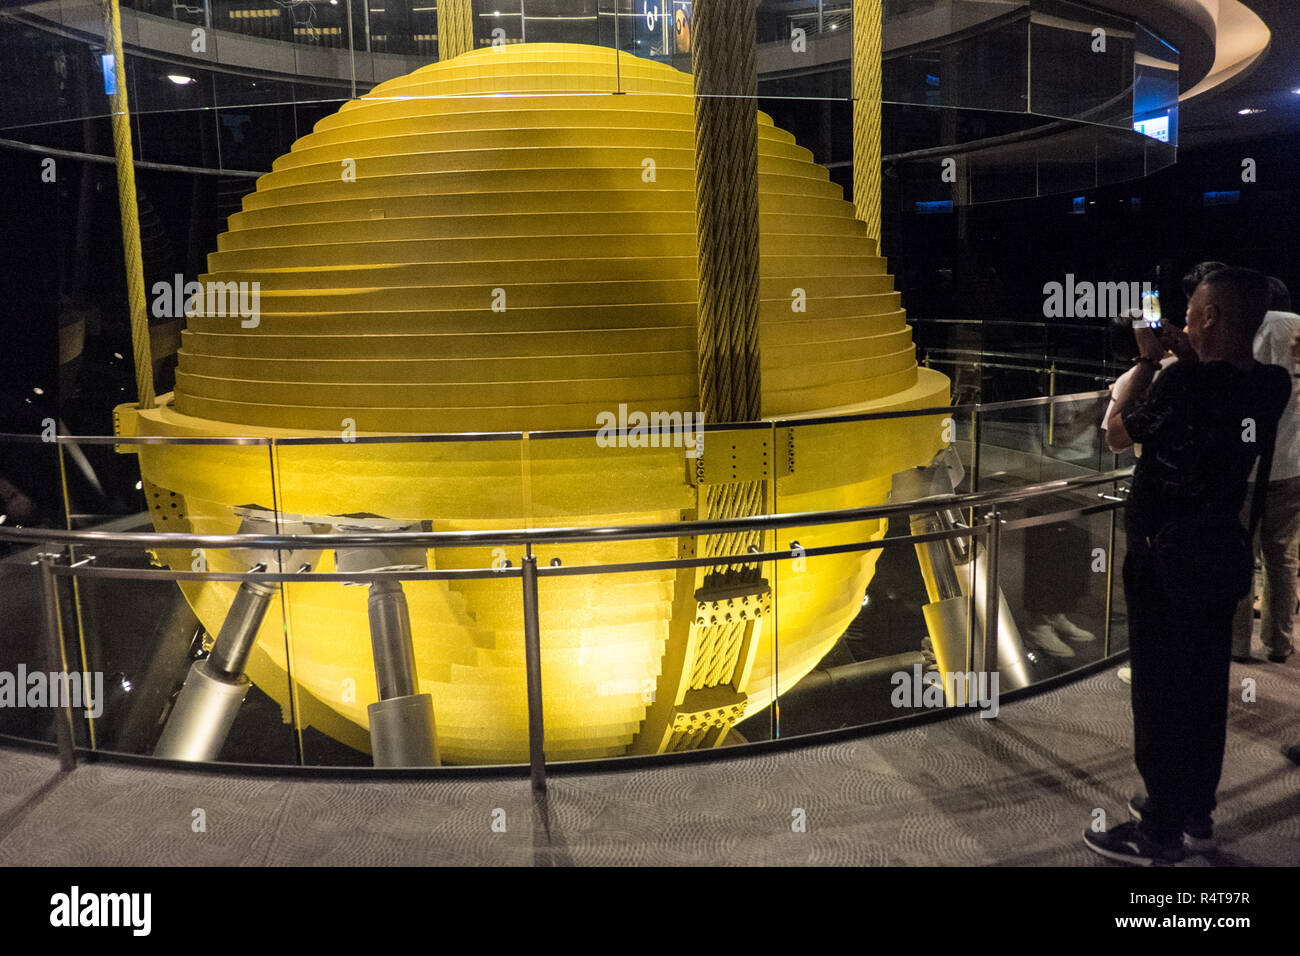 Huge,Damper,dampers,weight,counterweight,balance,at,top,of,observatory,tower,at,Taipei 101 Tower,Taipei,Chinese,China,Republic of China,ROC,Asia,Asian Stock Photo